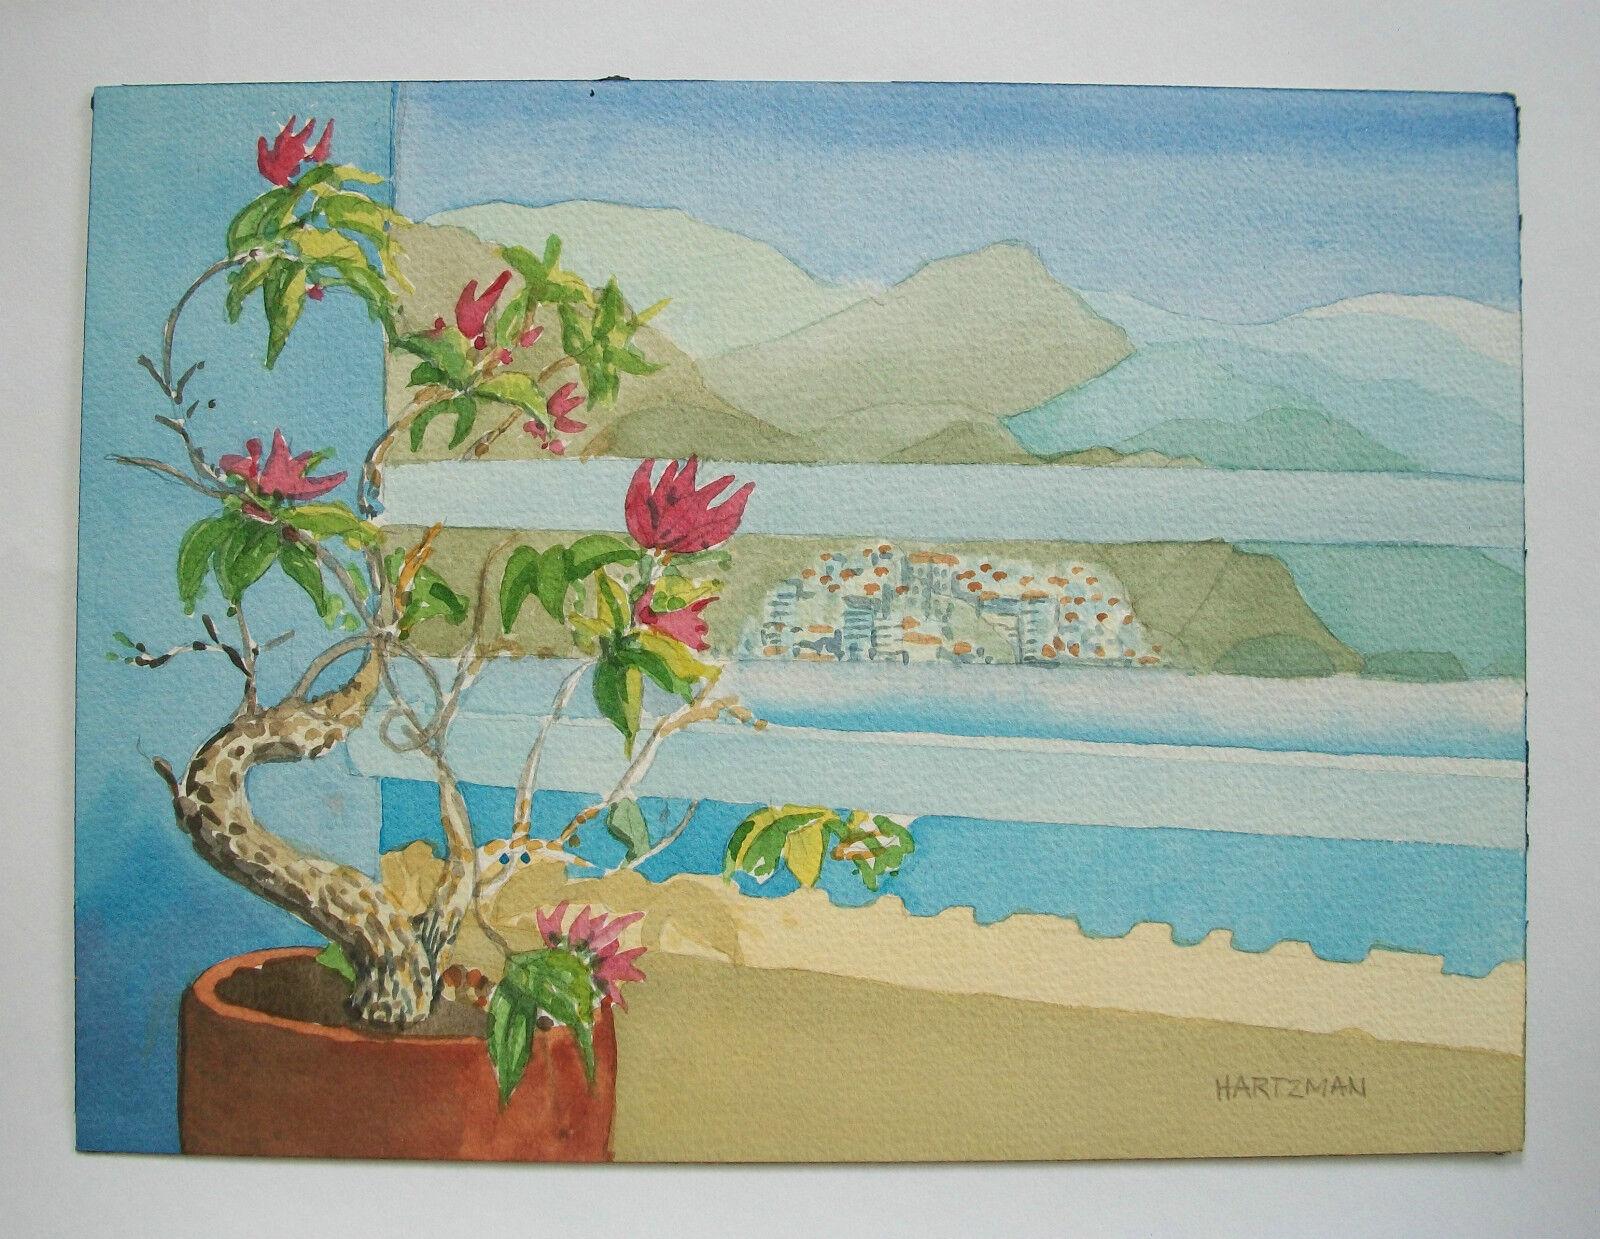 20th Century HARTZMAN - Art Deco Style Watercolor Painting on Paper - Unframed - Mid 20th C. For Sale